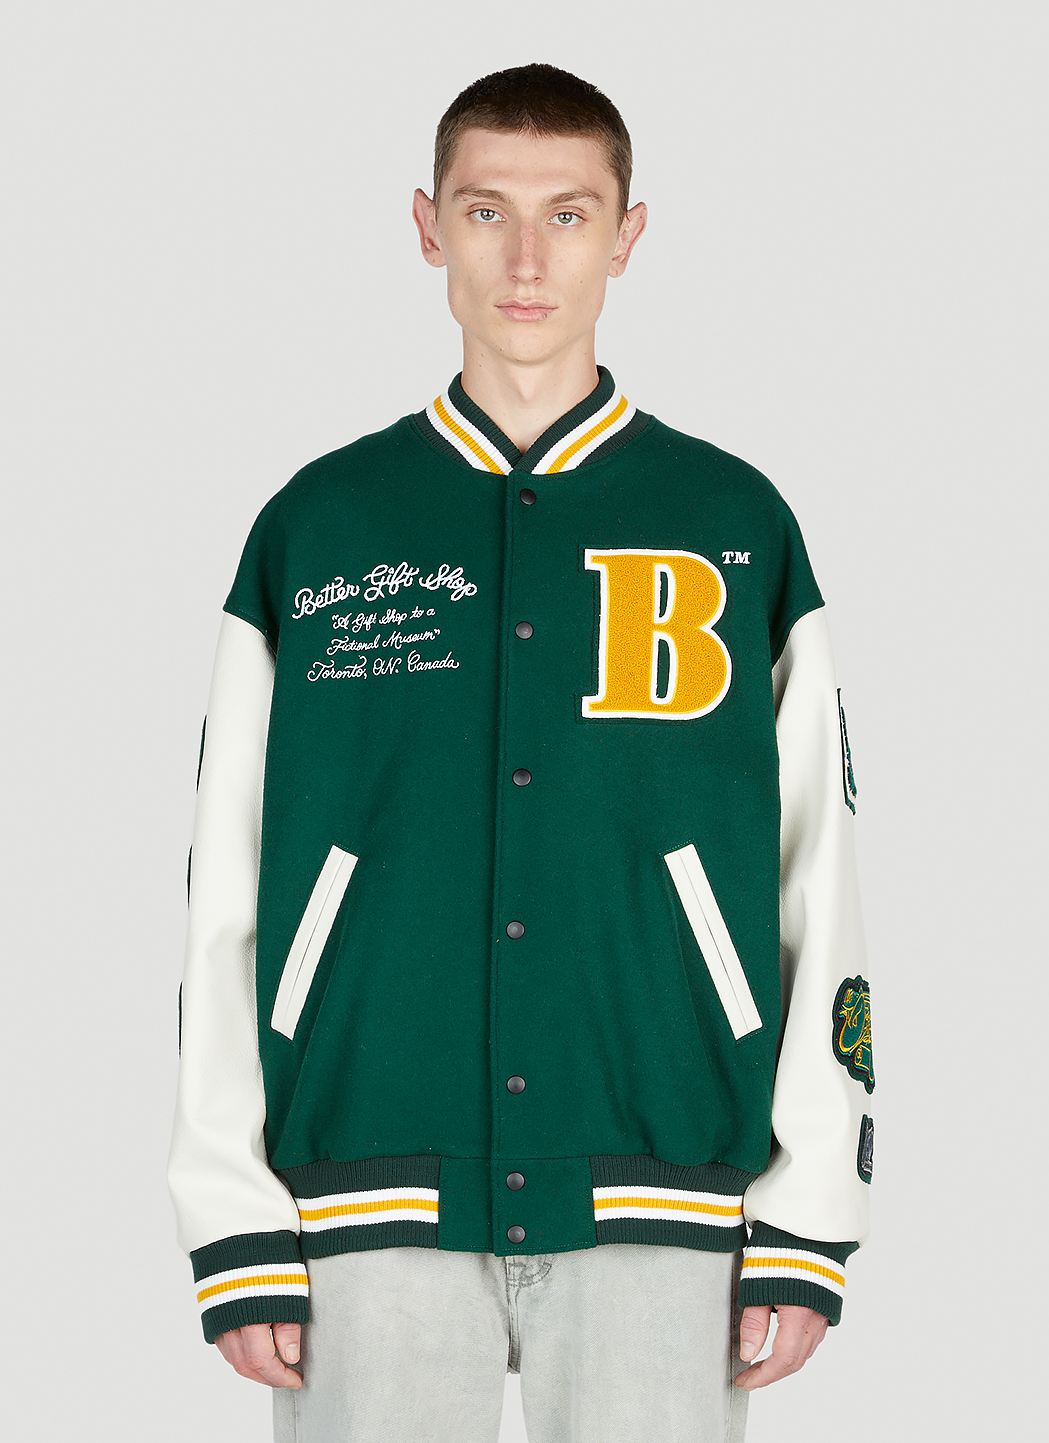 Gallery And Gift Shop 2023 Varisty Jacket